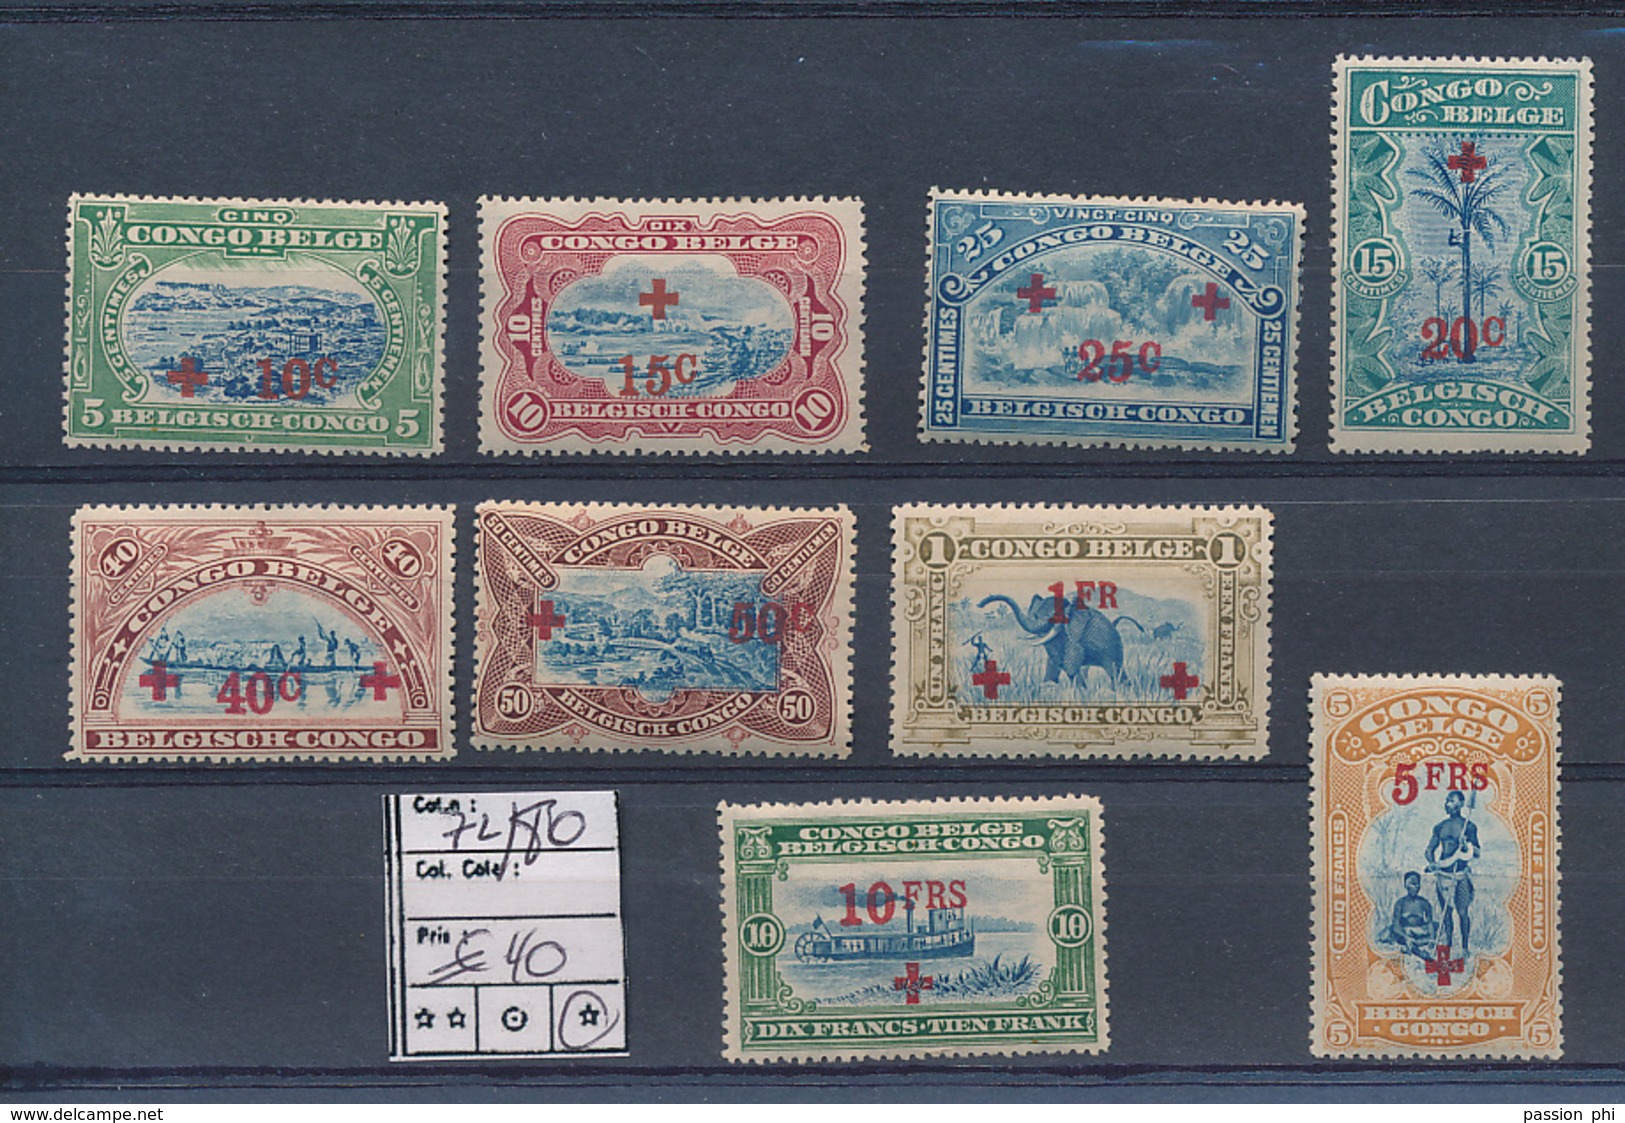 BELGIAN CONGO 1918 ISSUE RED CROSS COMPLETE SET COB 72/80 LH - Neufs